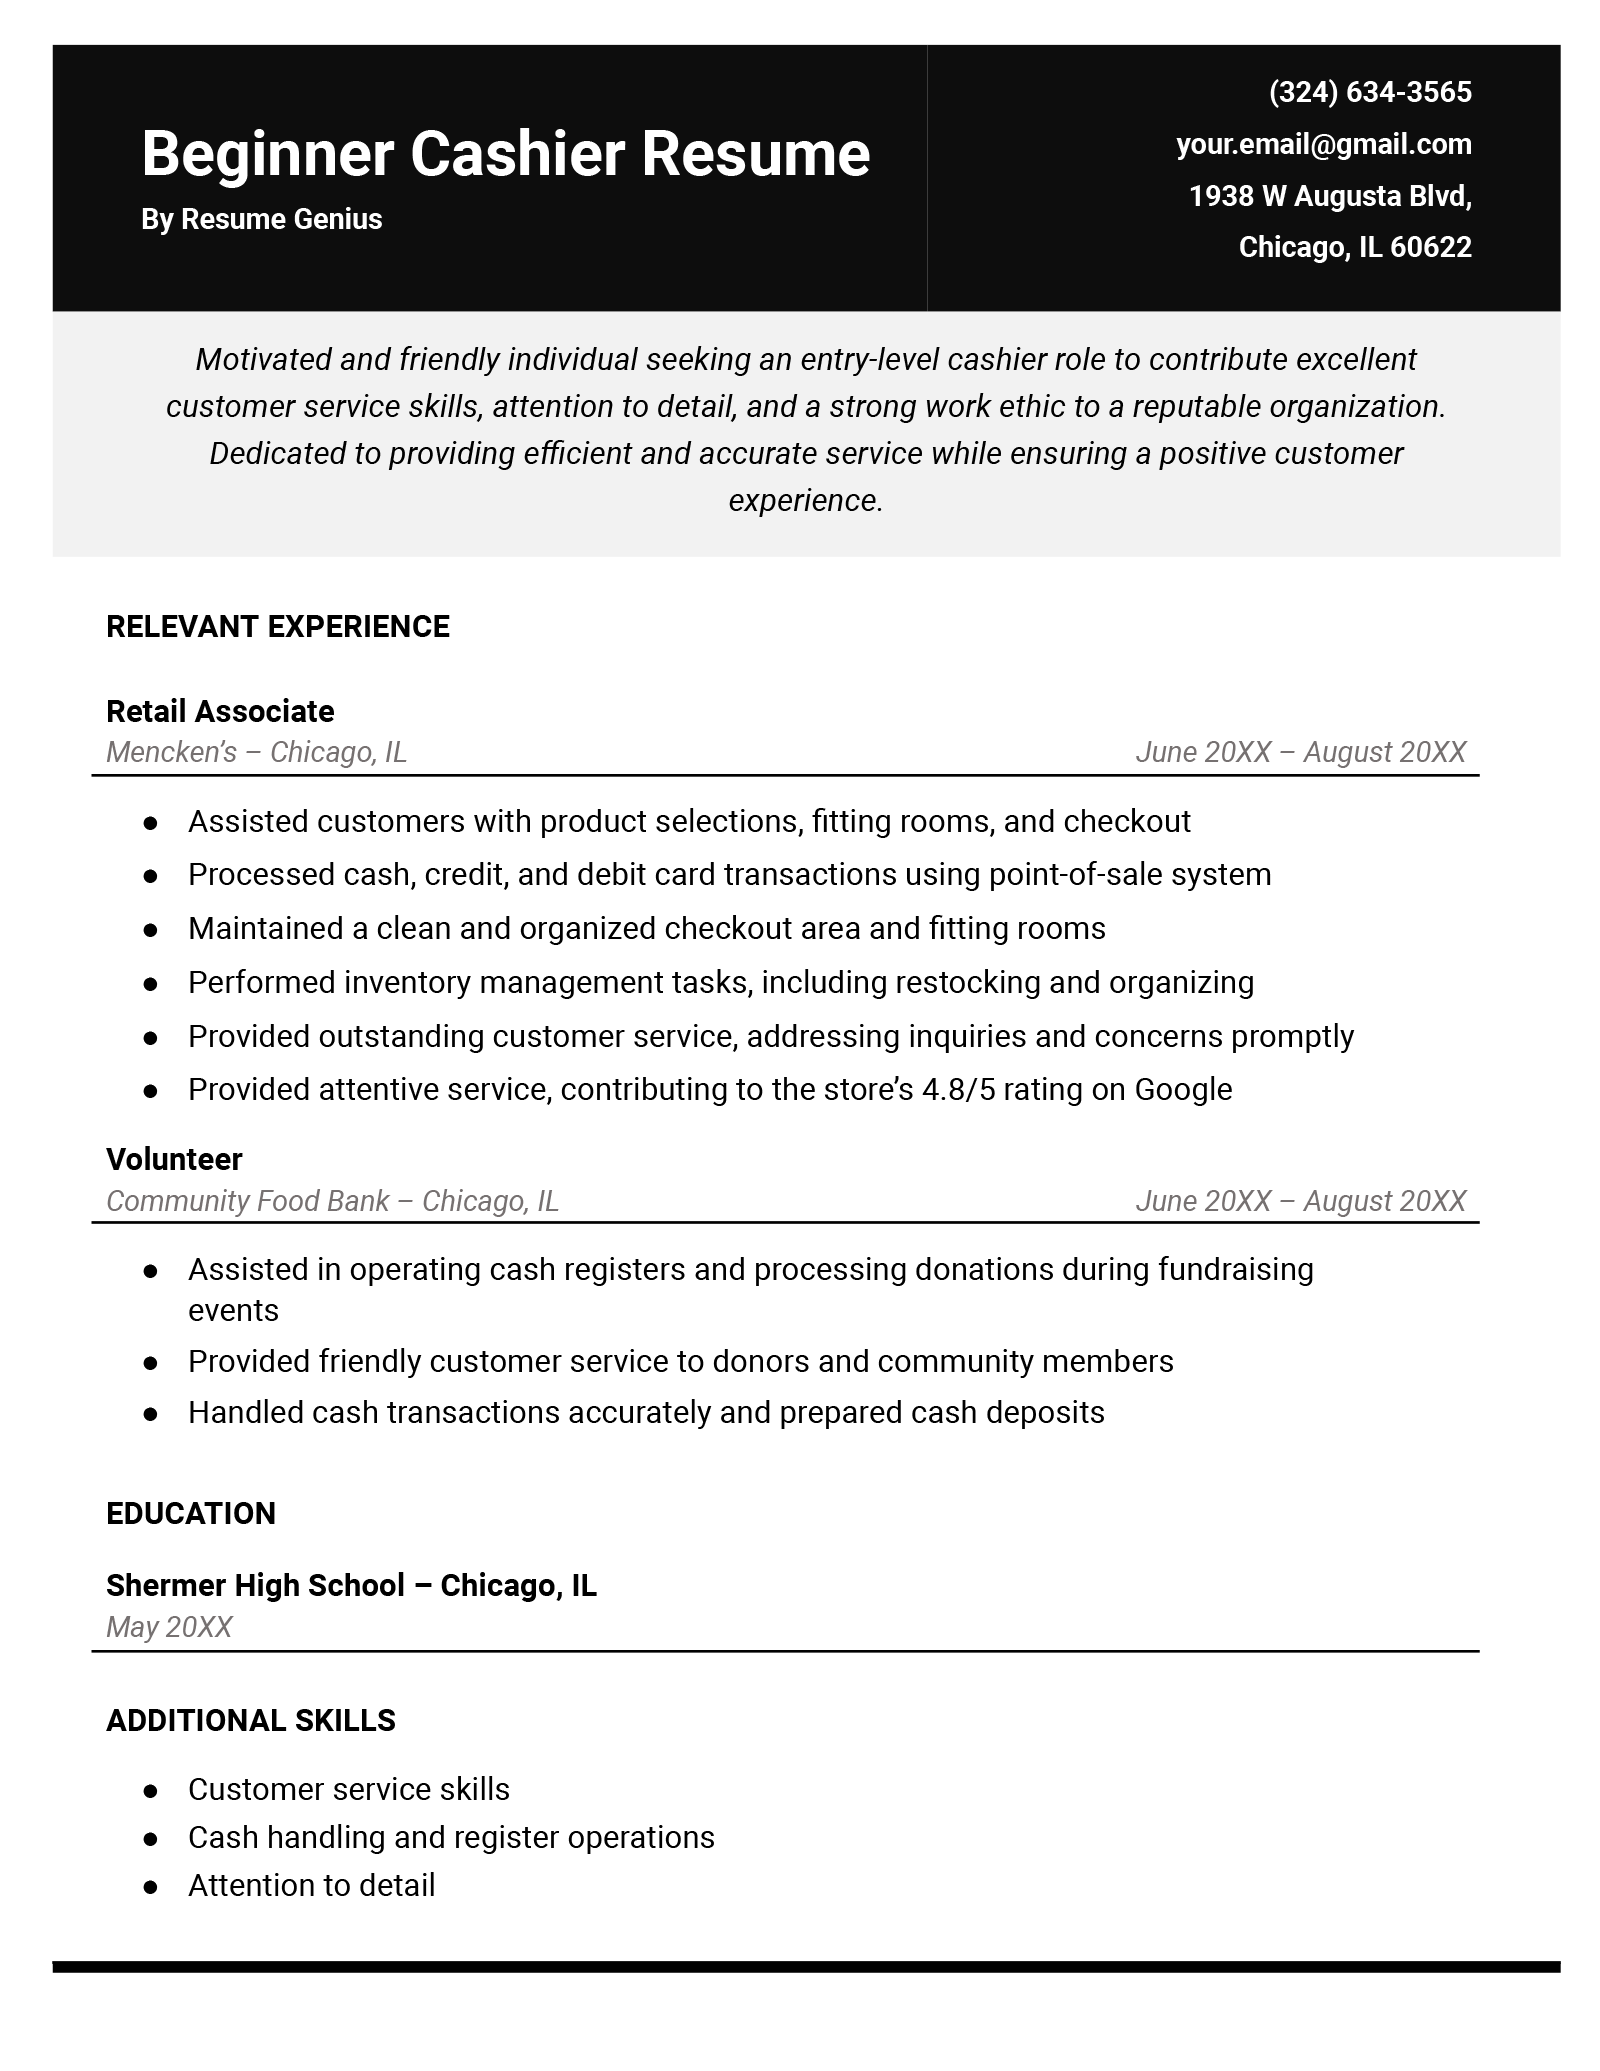 An example of a resume for a beginner cashier job.